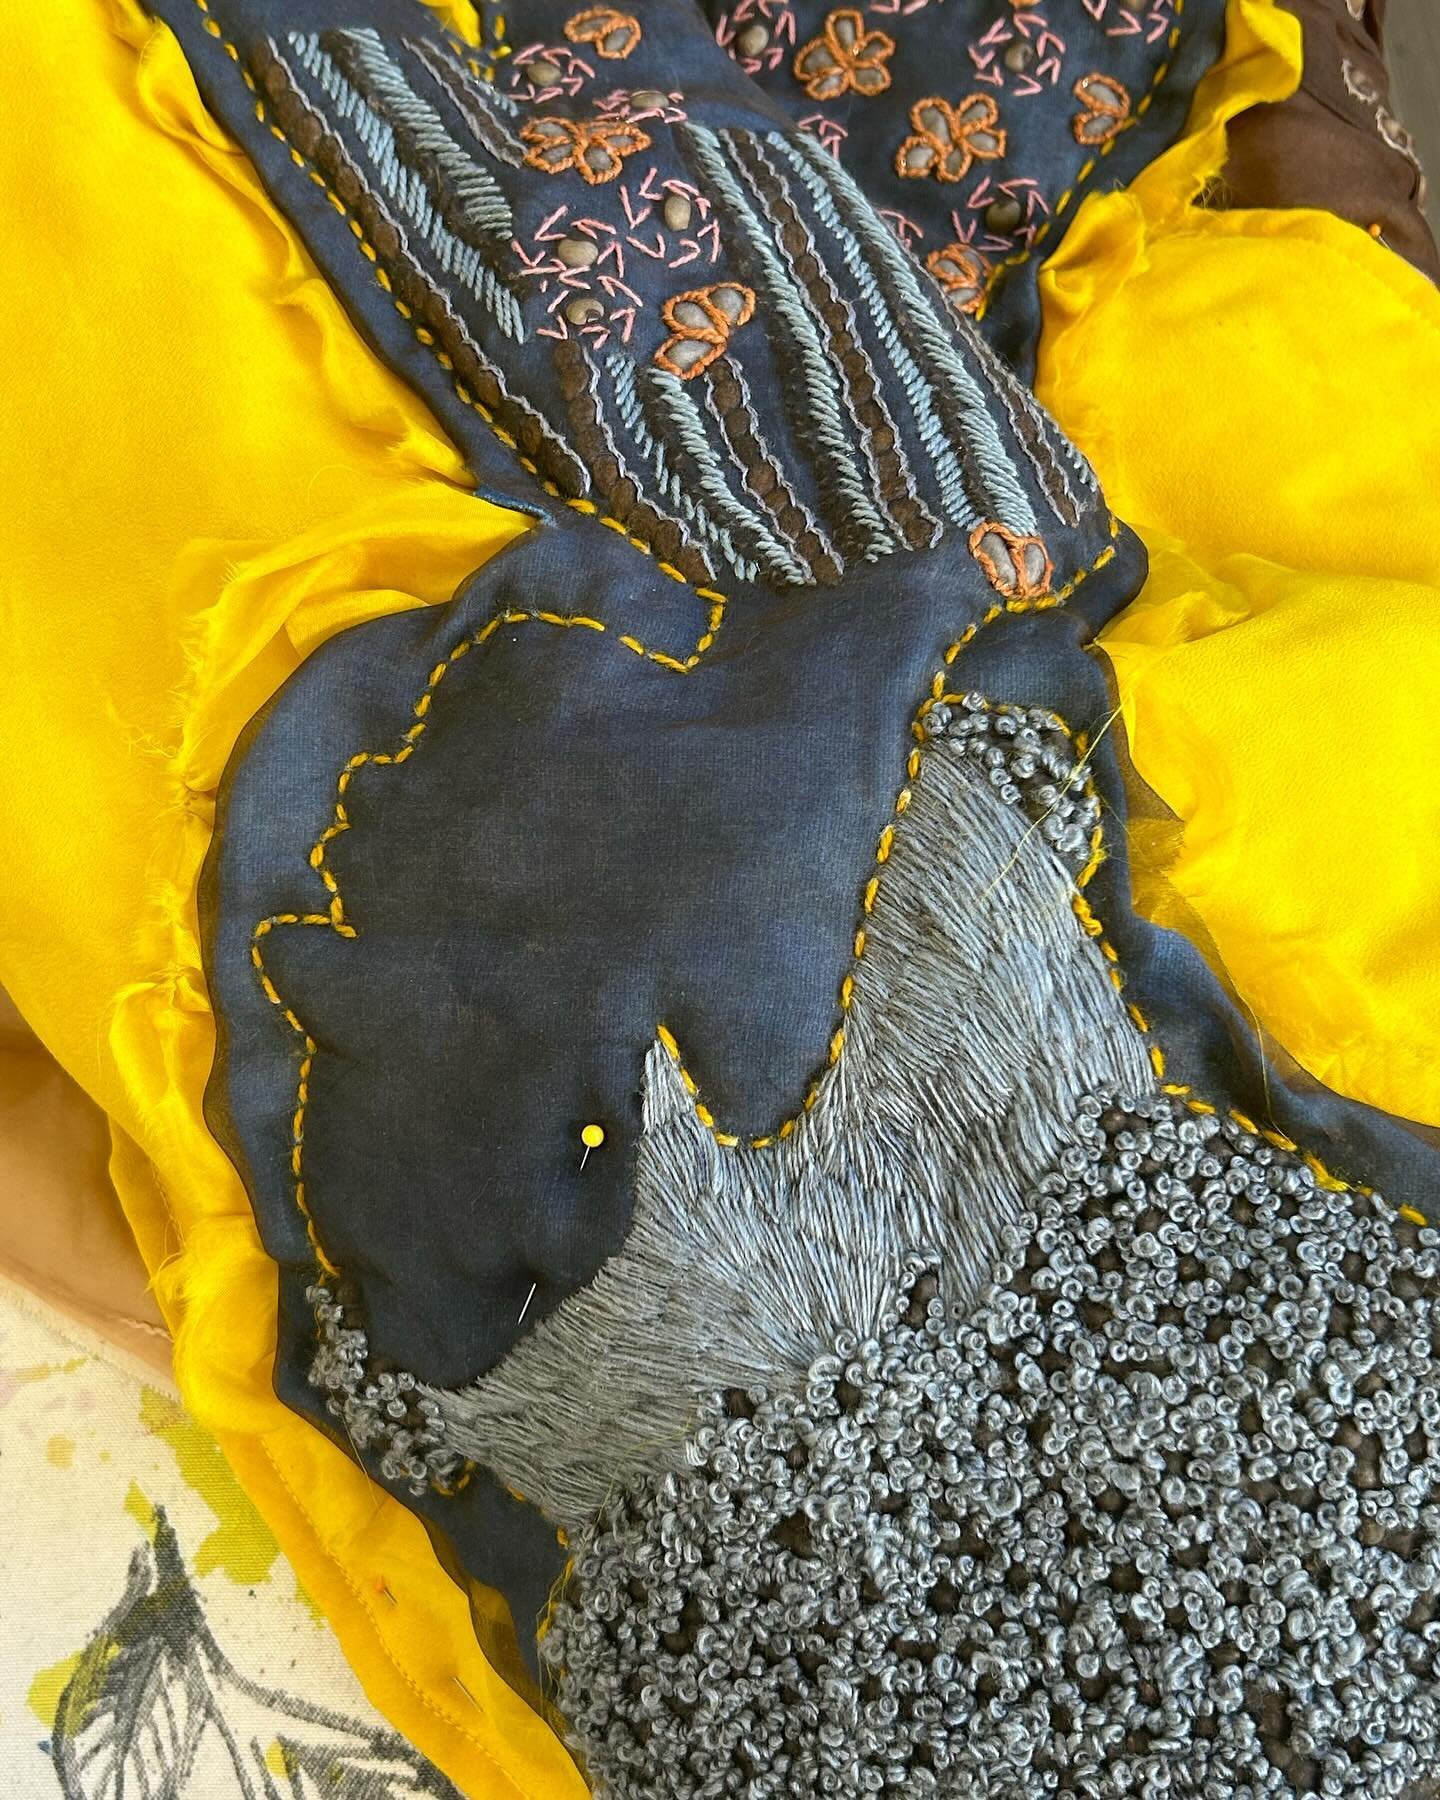 Adding the finishing touches, and some extra details since I have a bunch of new yarn to play with. 

#FiberArt #FiberArtist #NaturalDye #NaturallyDyed #indigo #embroidery